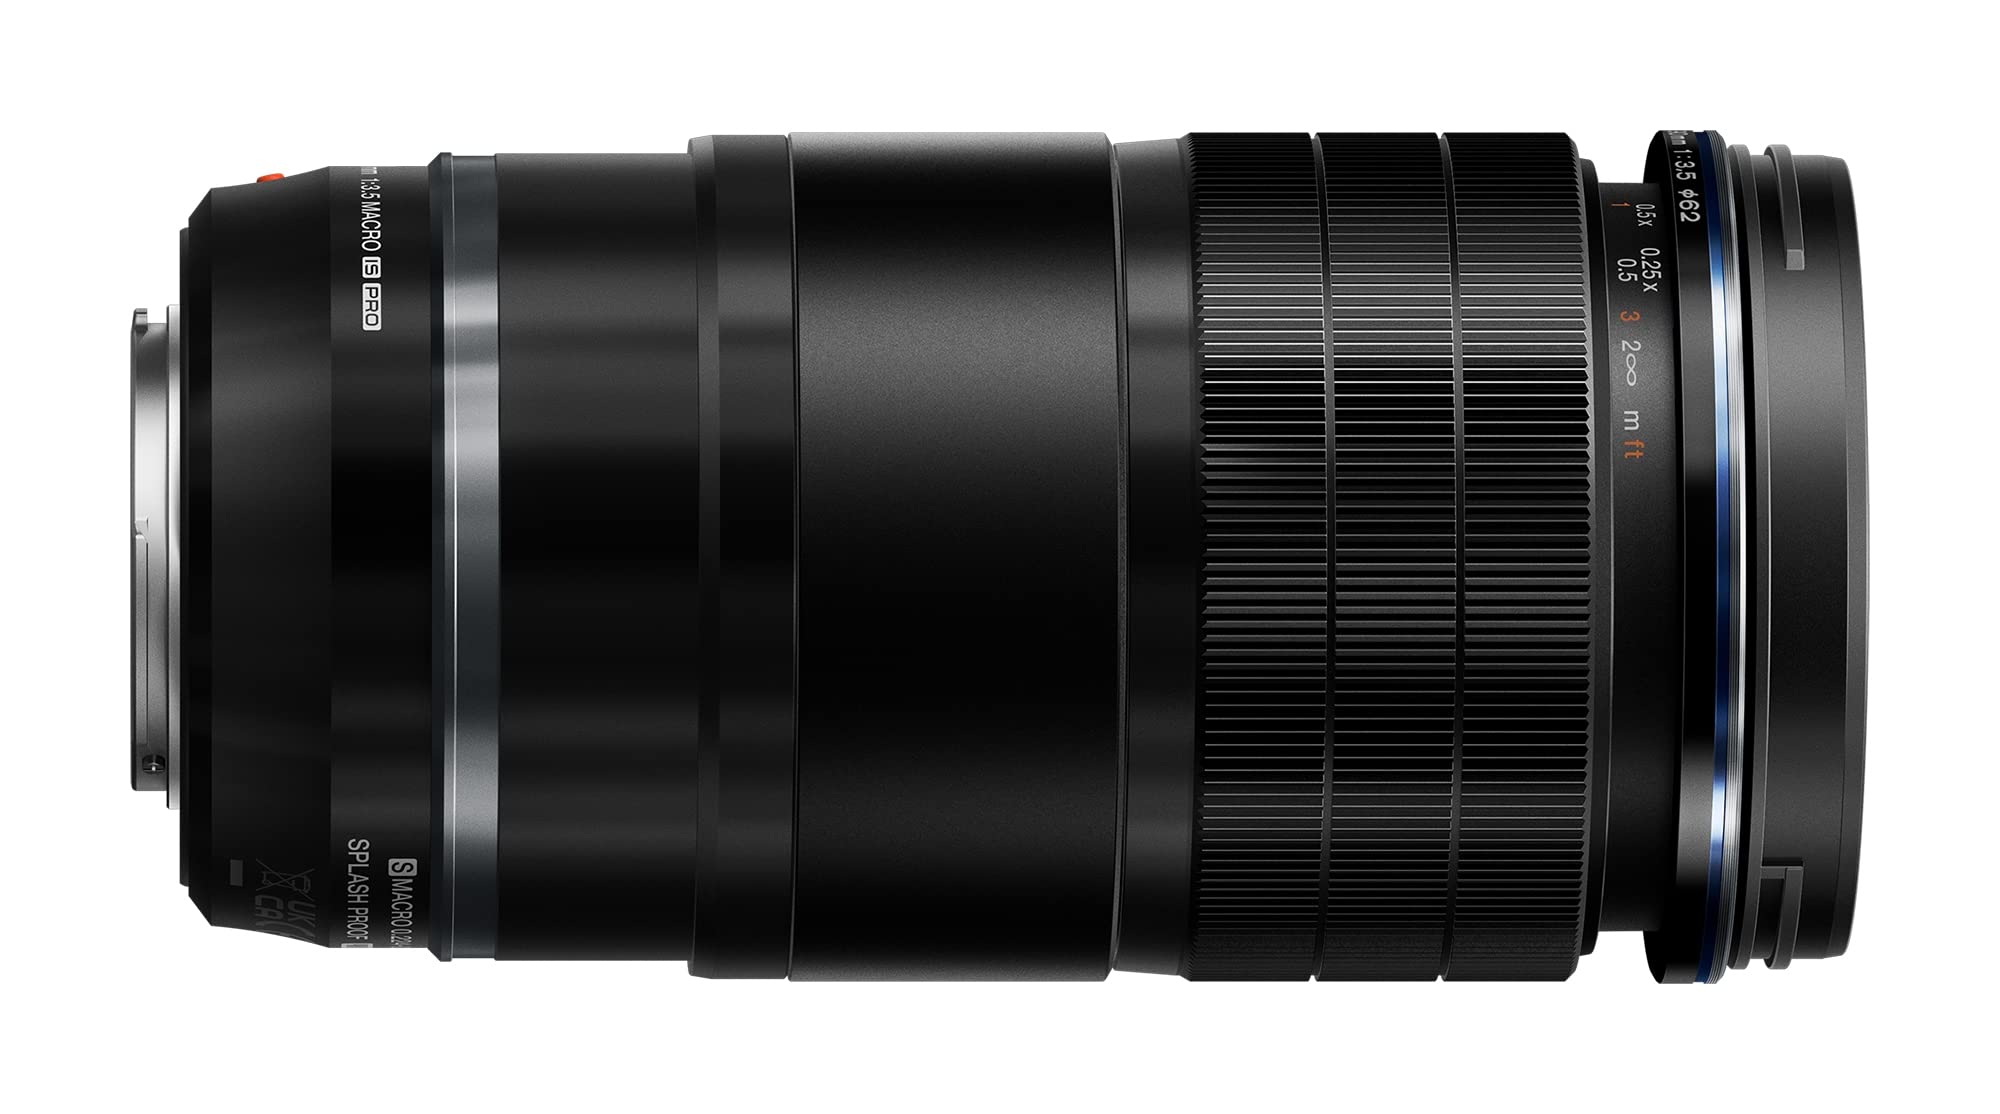 OM Digital Solutions OM System M.Zuiko Digital ED 90mm F3.5 Macro is PRO for Micro Four Thirds System Camera, Weather Sealed Design, MF Clutch, Fluorine Coating, Compatible with Teleconverter